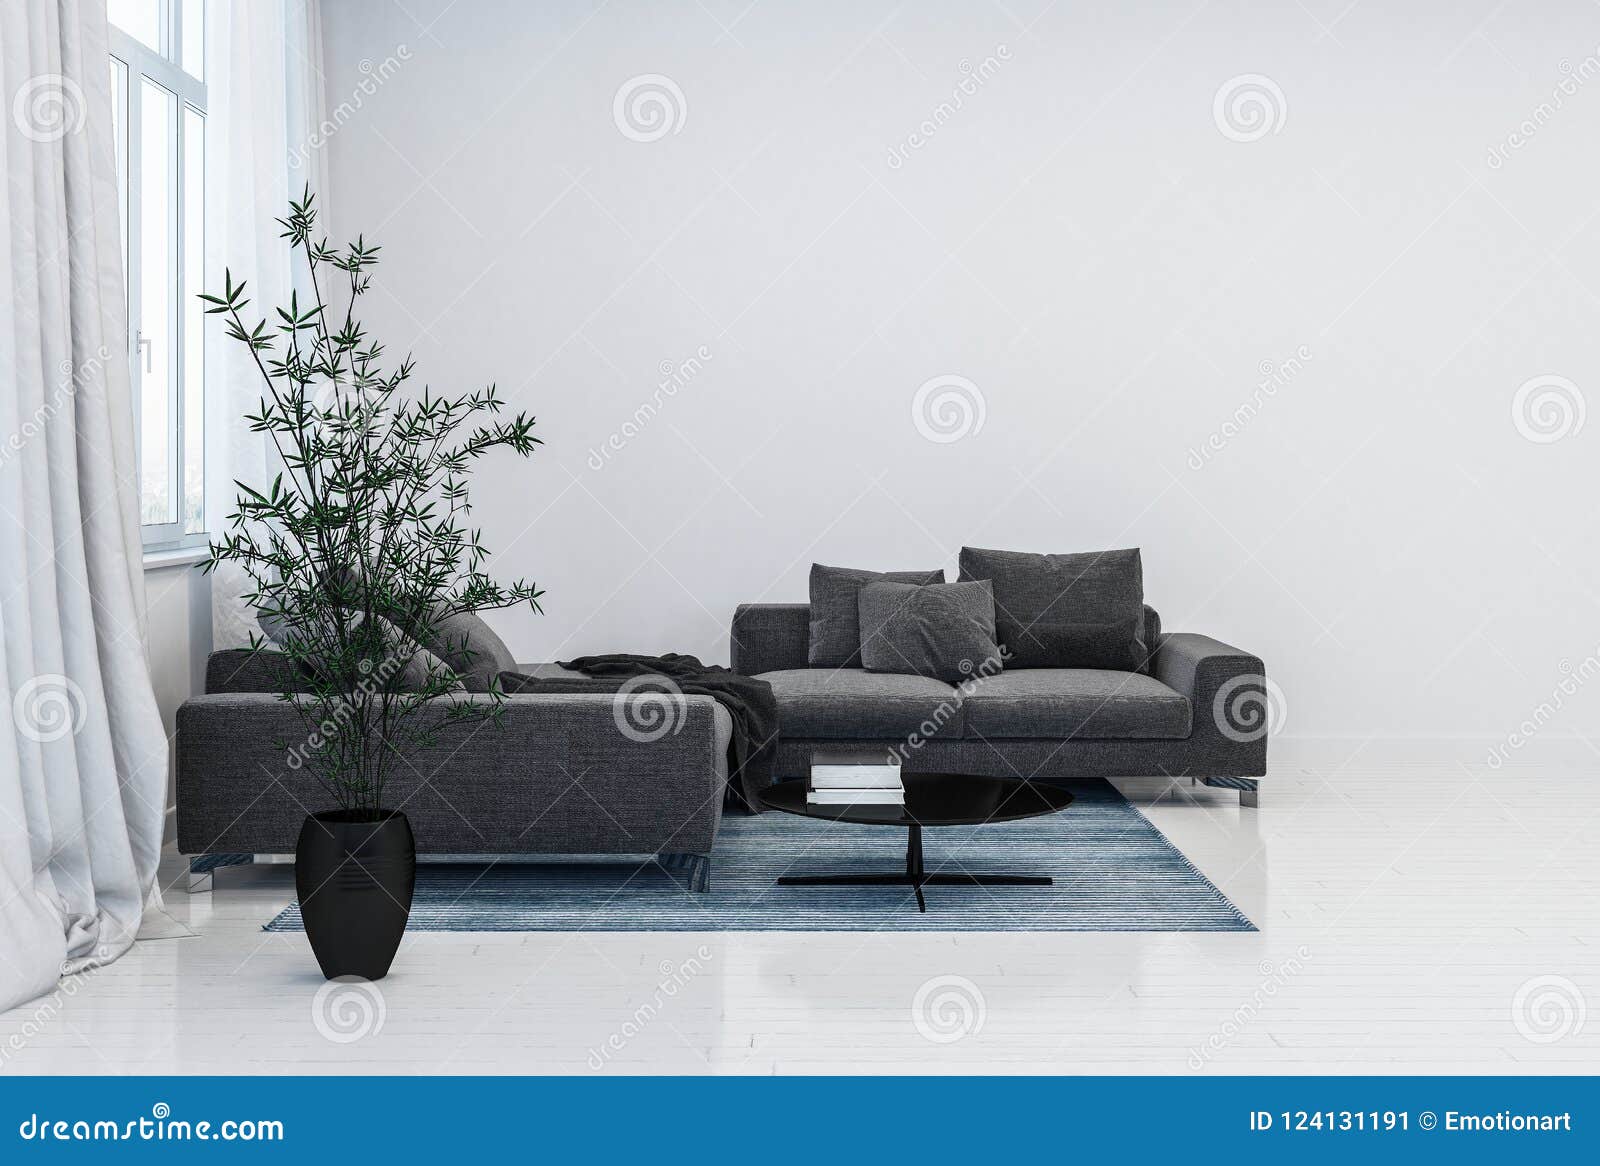 Black Couch And Plant Pot In Glossy White Room Stock